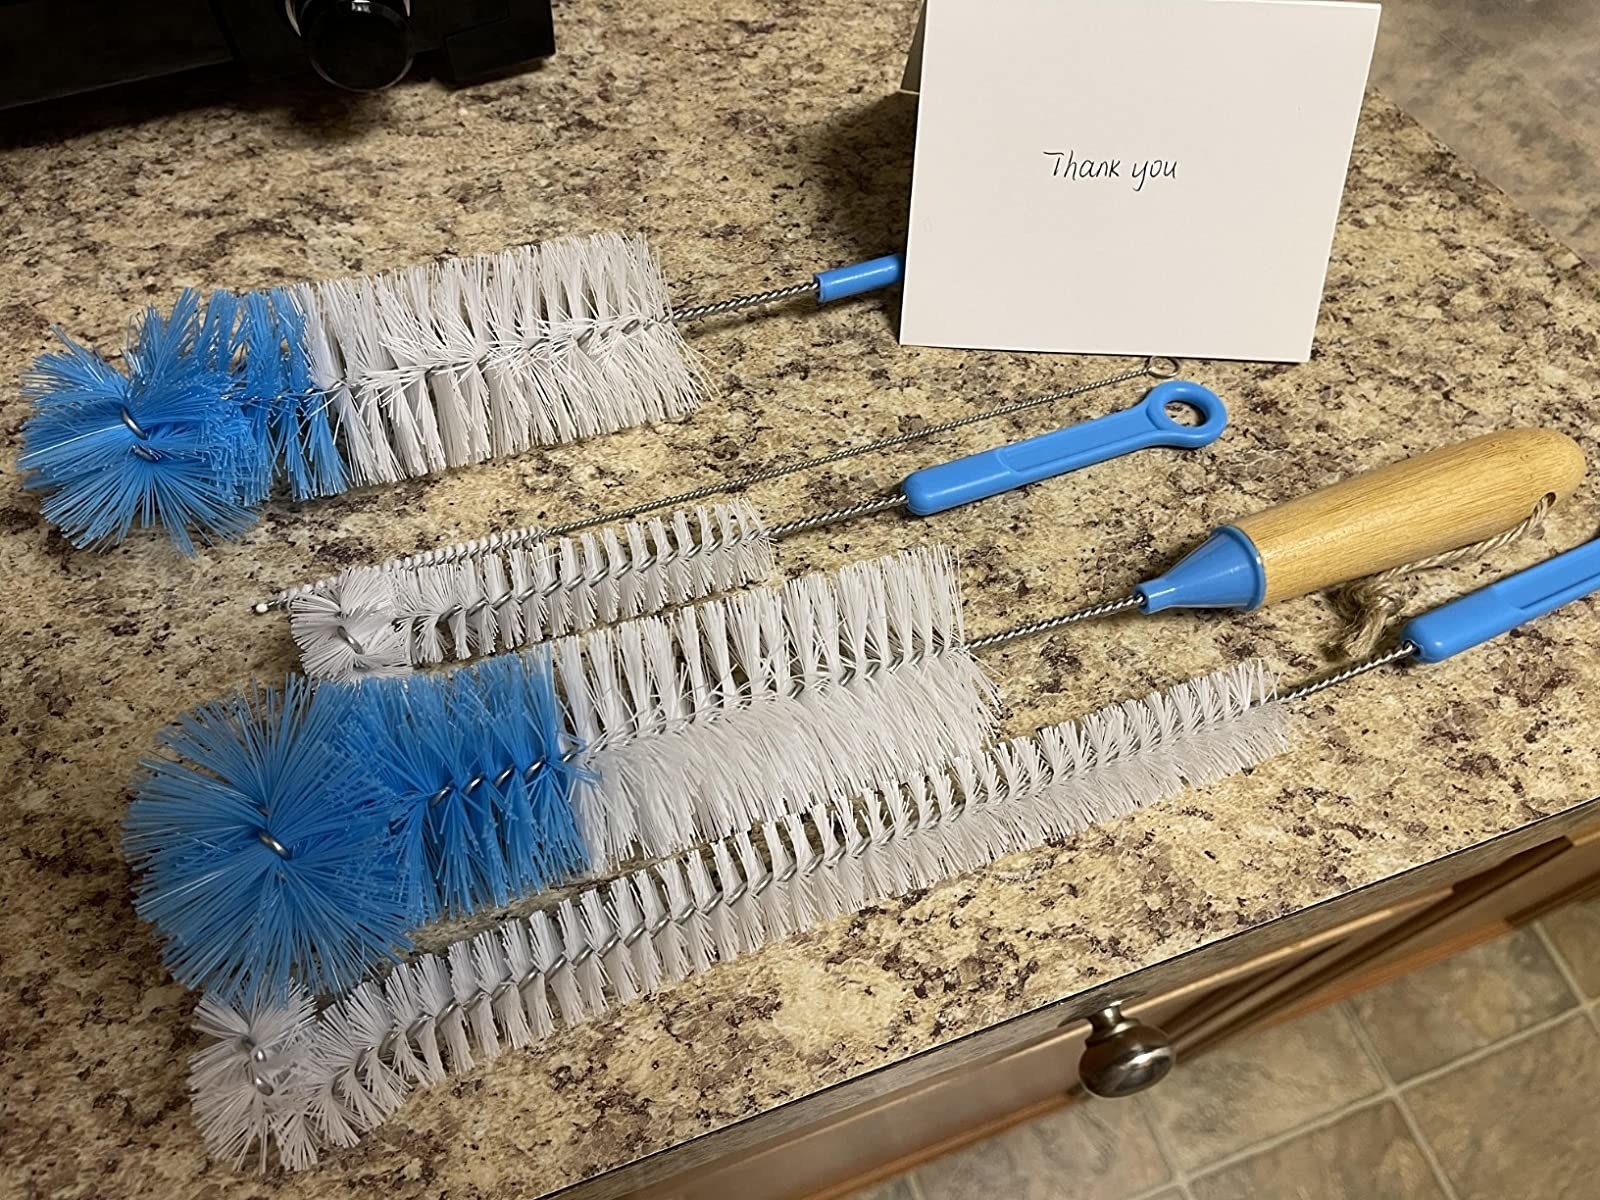 the full set of bottle cleaners with a narrow brush, to big bottle brushes, a small straw, and a straw cleaner